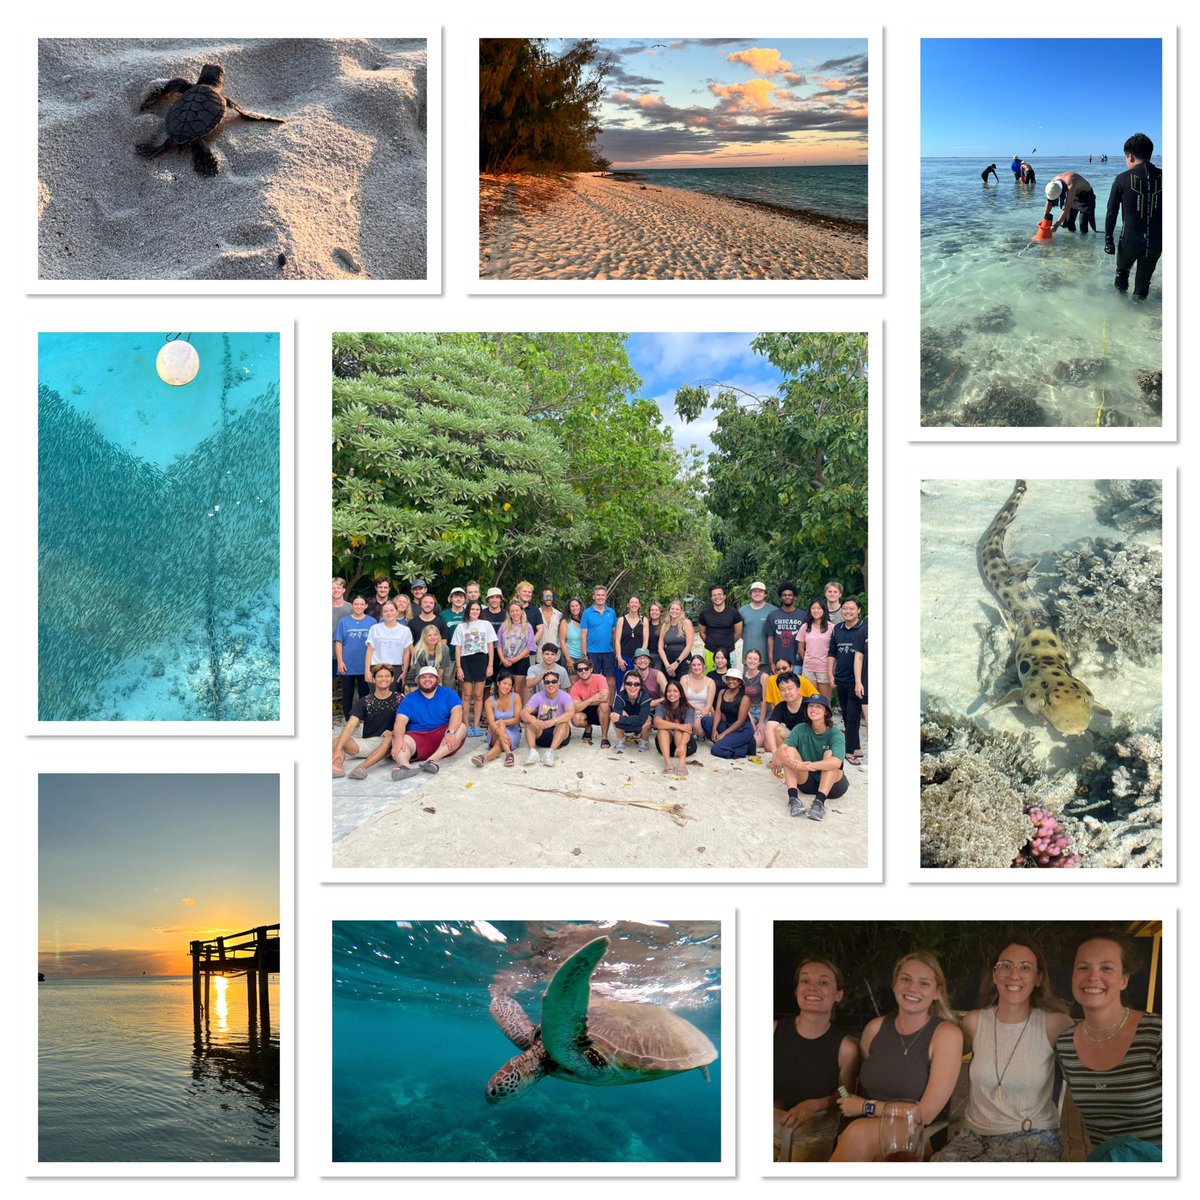 Coming full circle from student to TA after an incredible week of teaching @UTS_Science Coral Reef Ecology at @HIRS_UQ 🪸 It’s been super challenging, but extremely inspiring to be part of such an amazing team! 🏝️